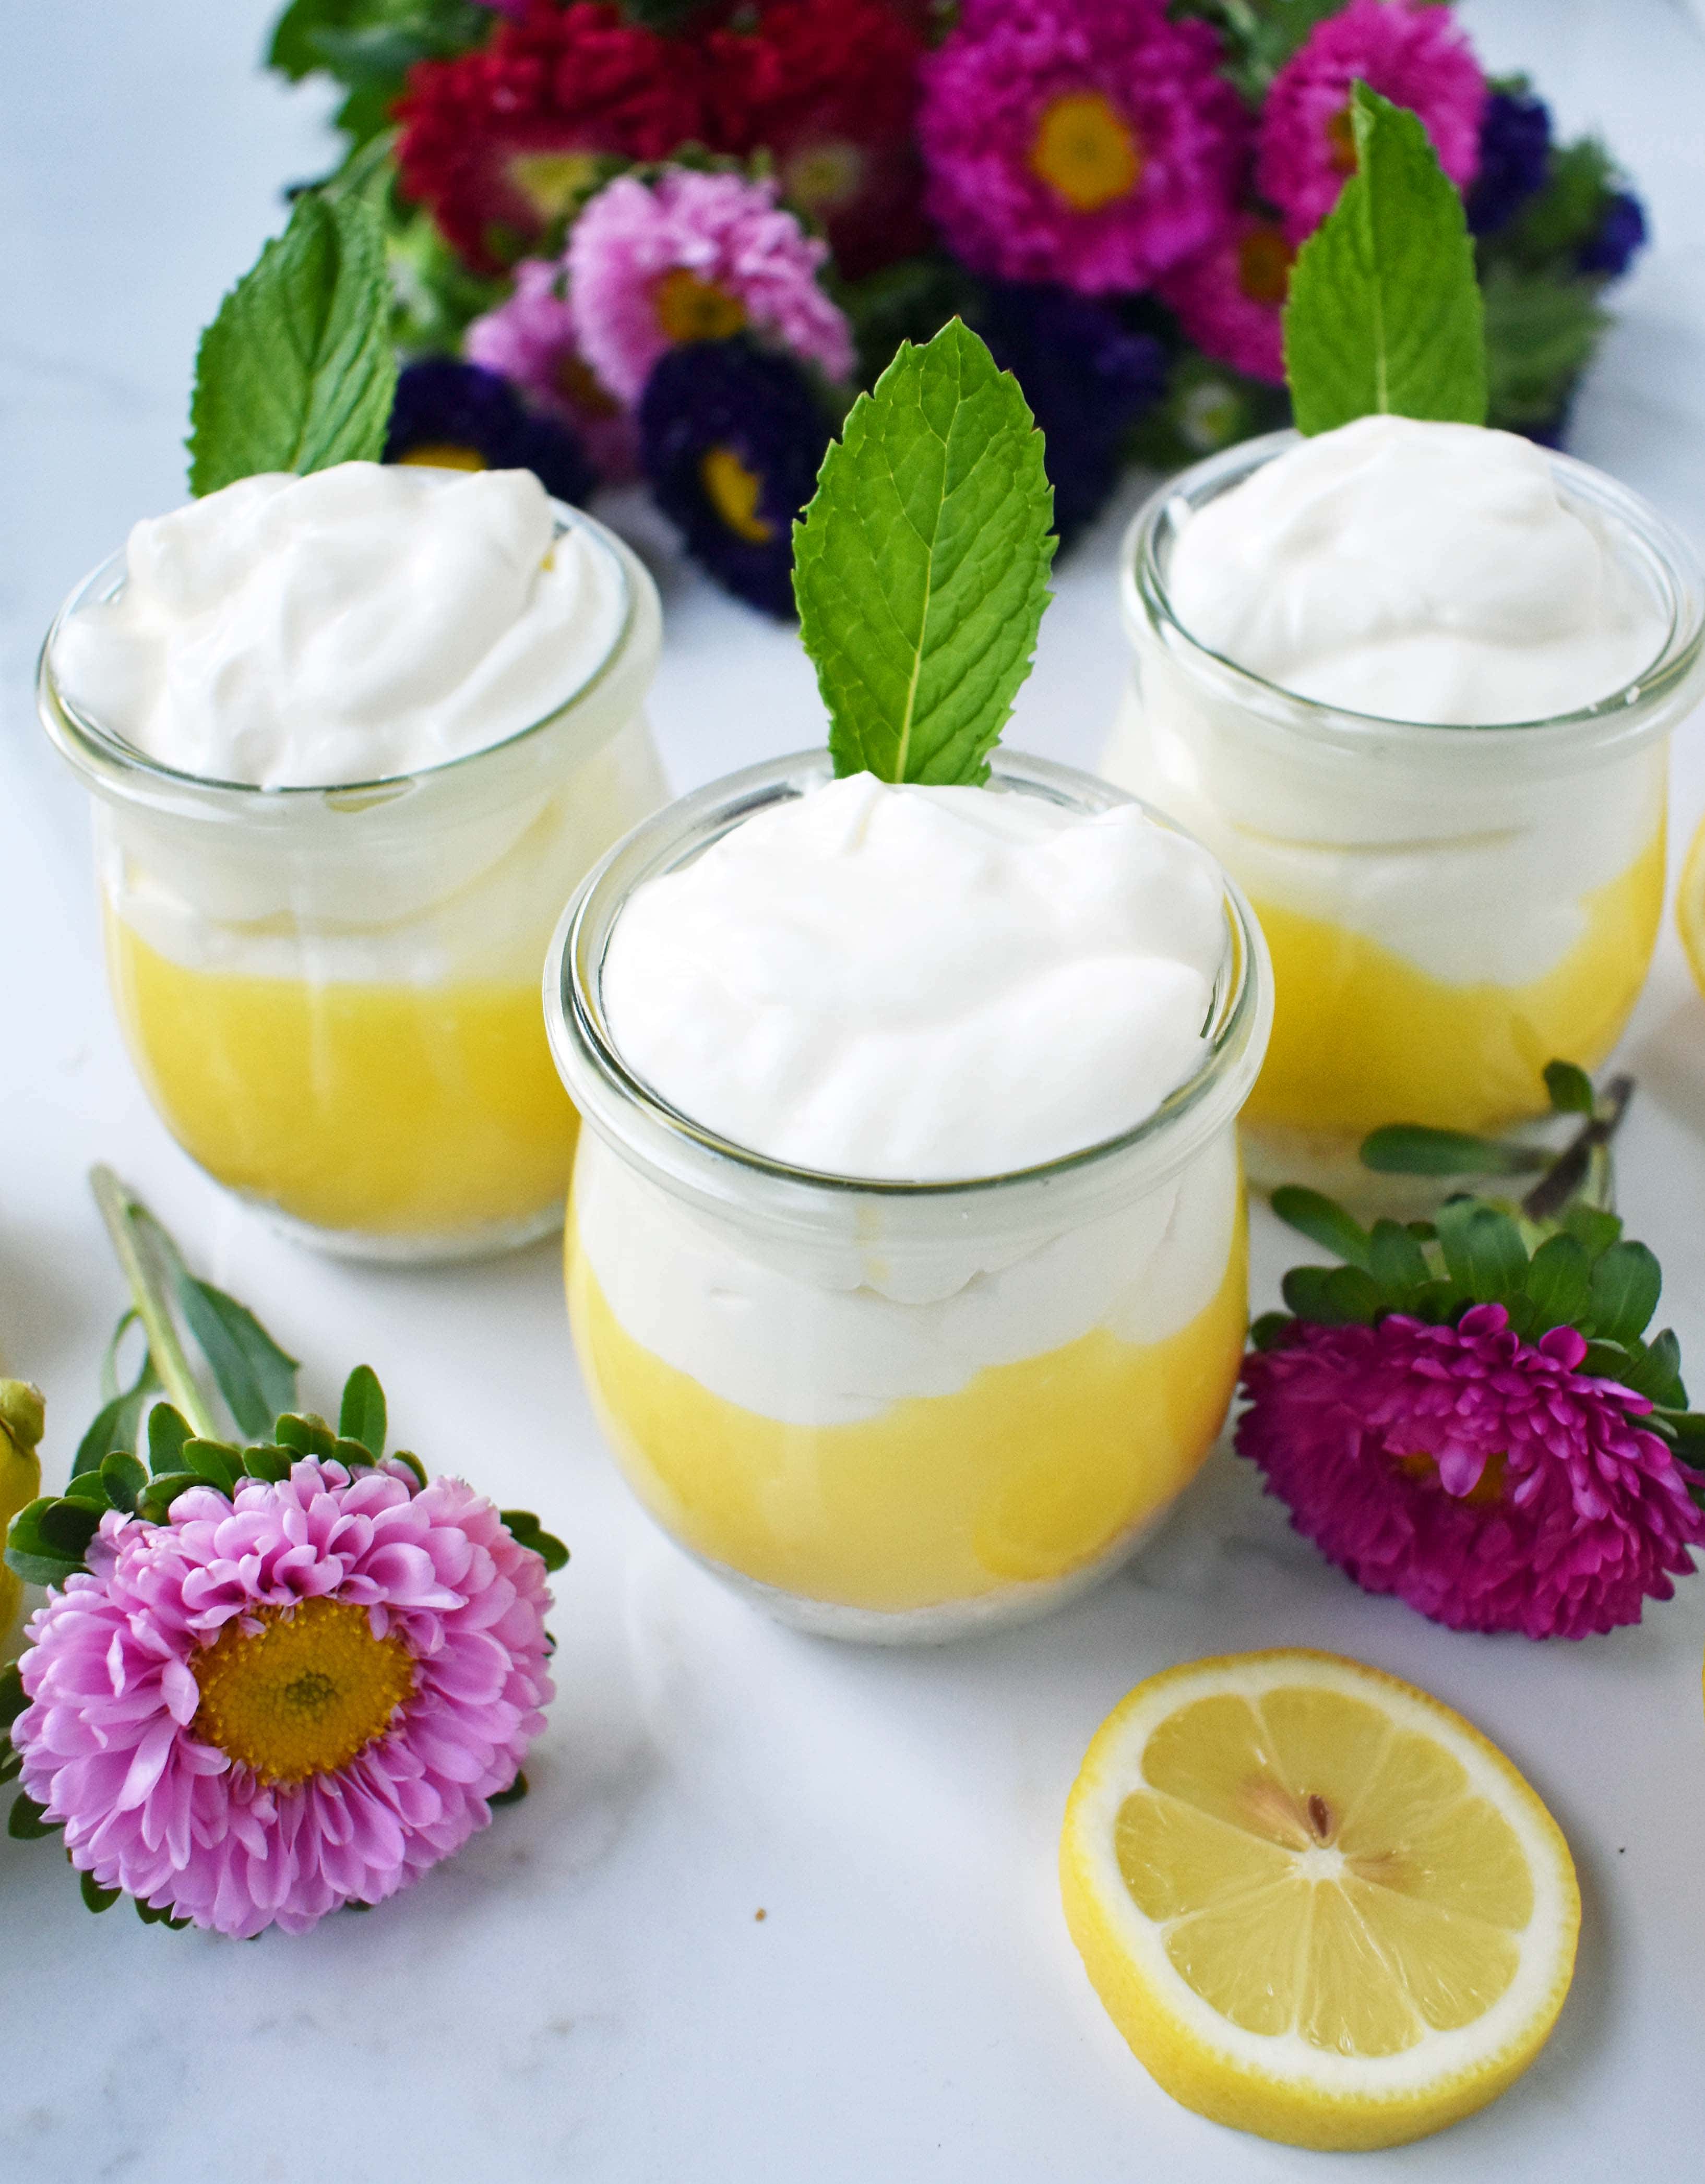 Lemon Cream Parfait Pie Jars. Homemade lemon curd layered with graham or butter cookie crust and sweetened cream cheese and whipped cream. The perfect dessert for parties, Mother's Day, Spring, or Summer parties. It's a lemon cream pie in a jar. Also, tips on how to make it into a 9 inch lemon cream pie. www.modernhoney.com